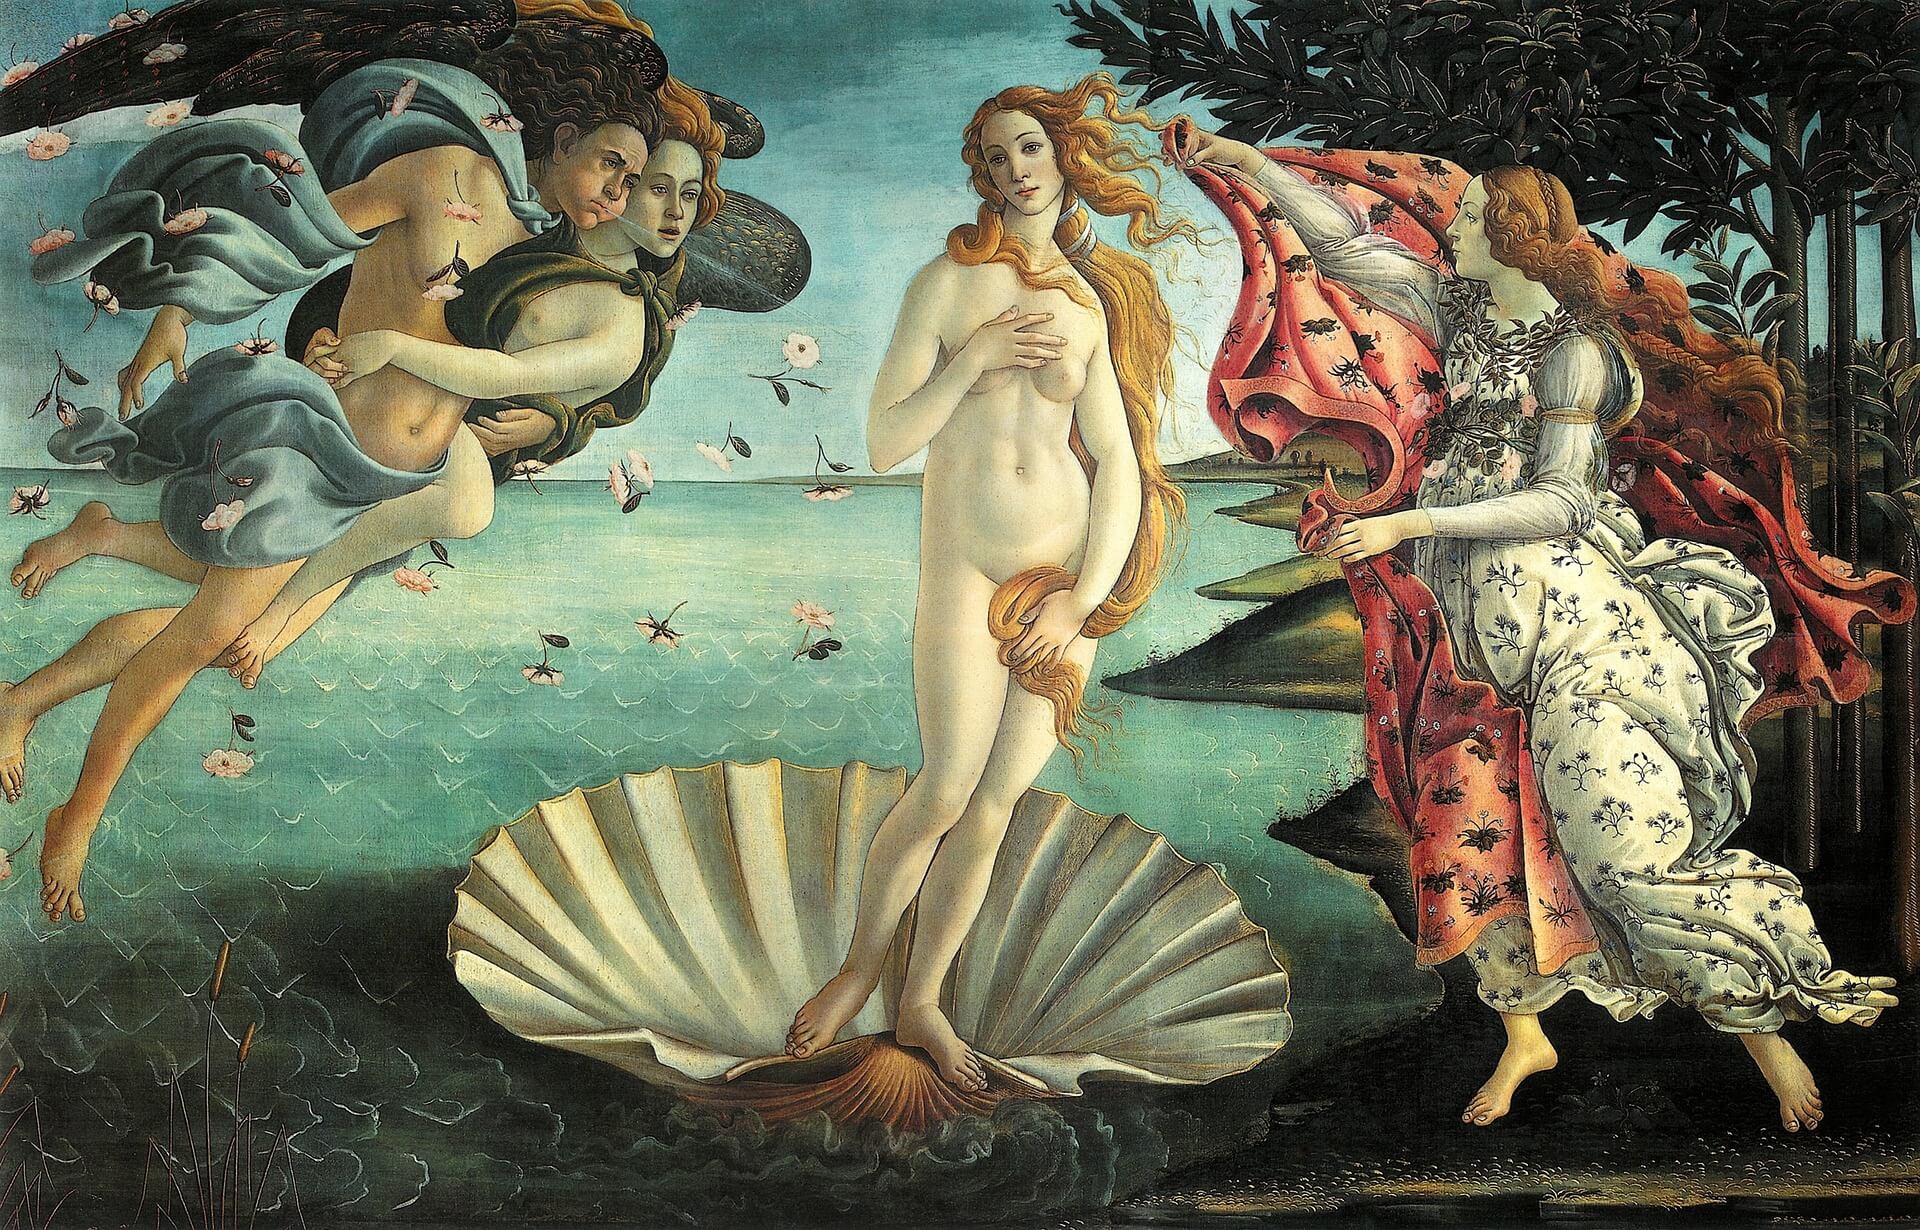 The great masterpieces of the Uffizi Gallery in Florence